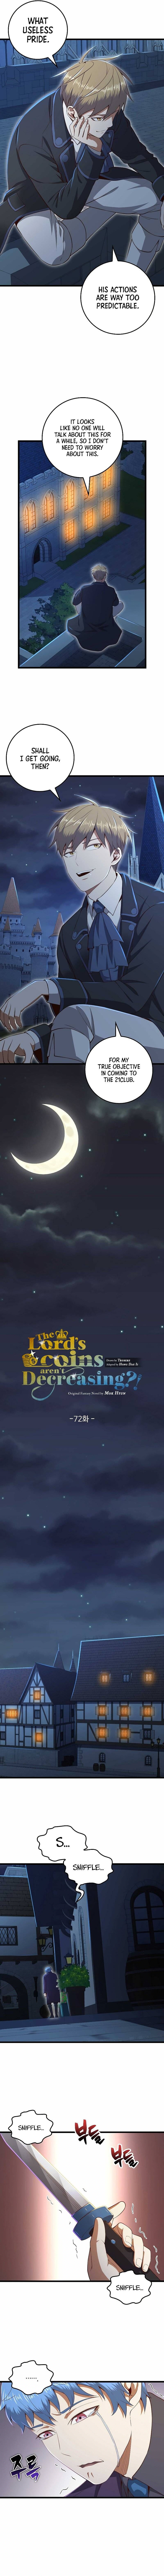 the_lords_coins_arent_decreasing_72_3